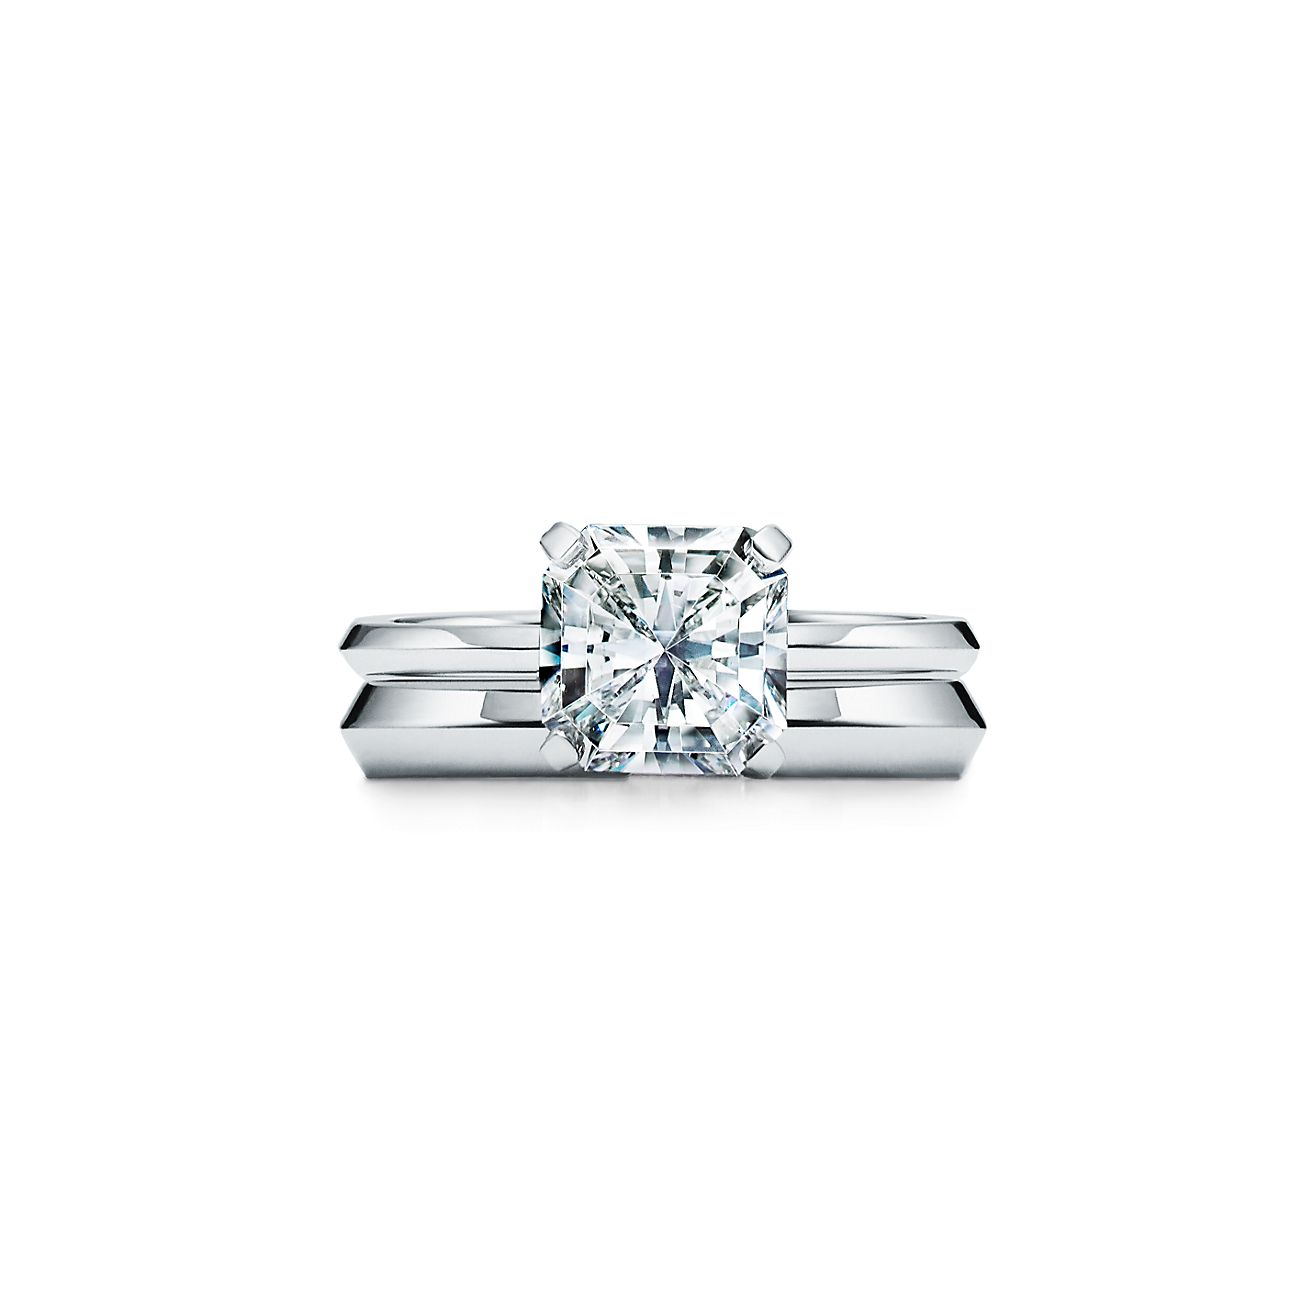 Tiffany True™ Engagement Ring with a 